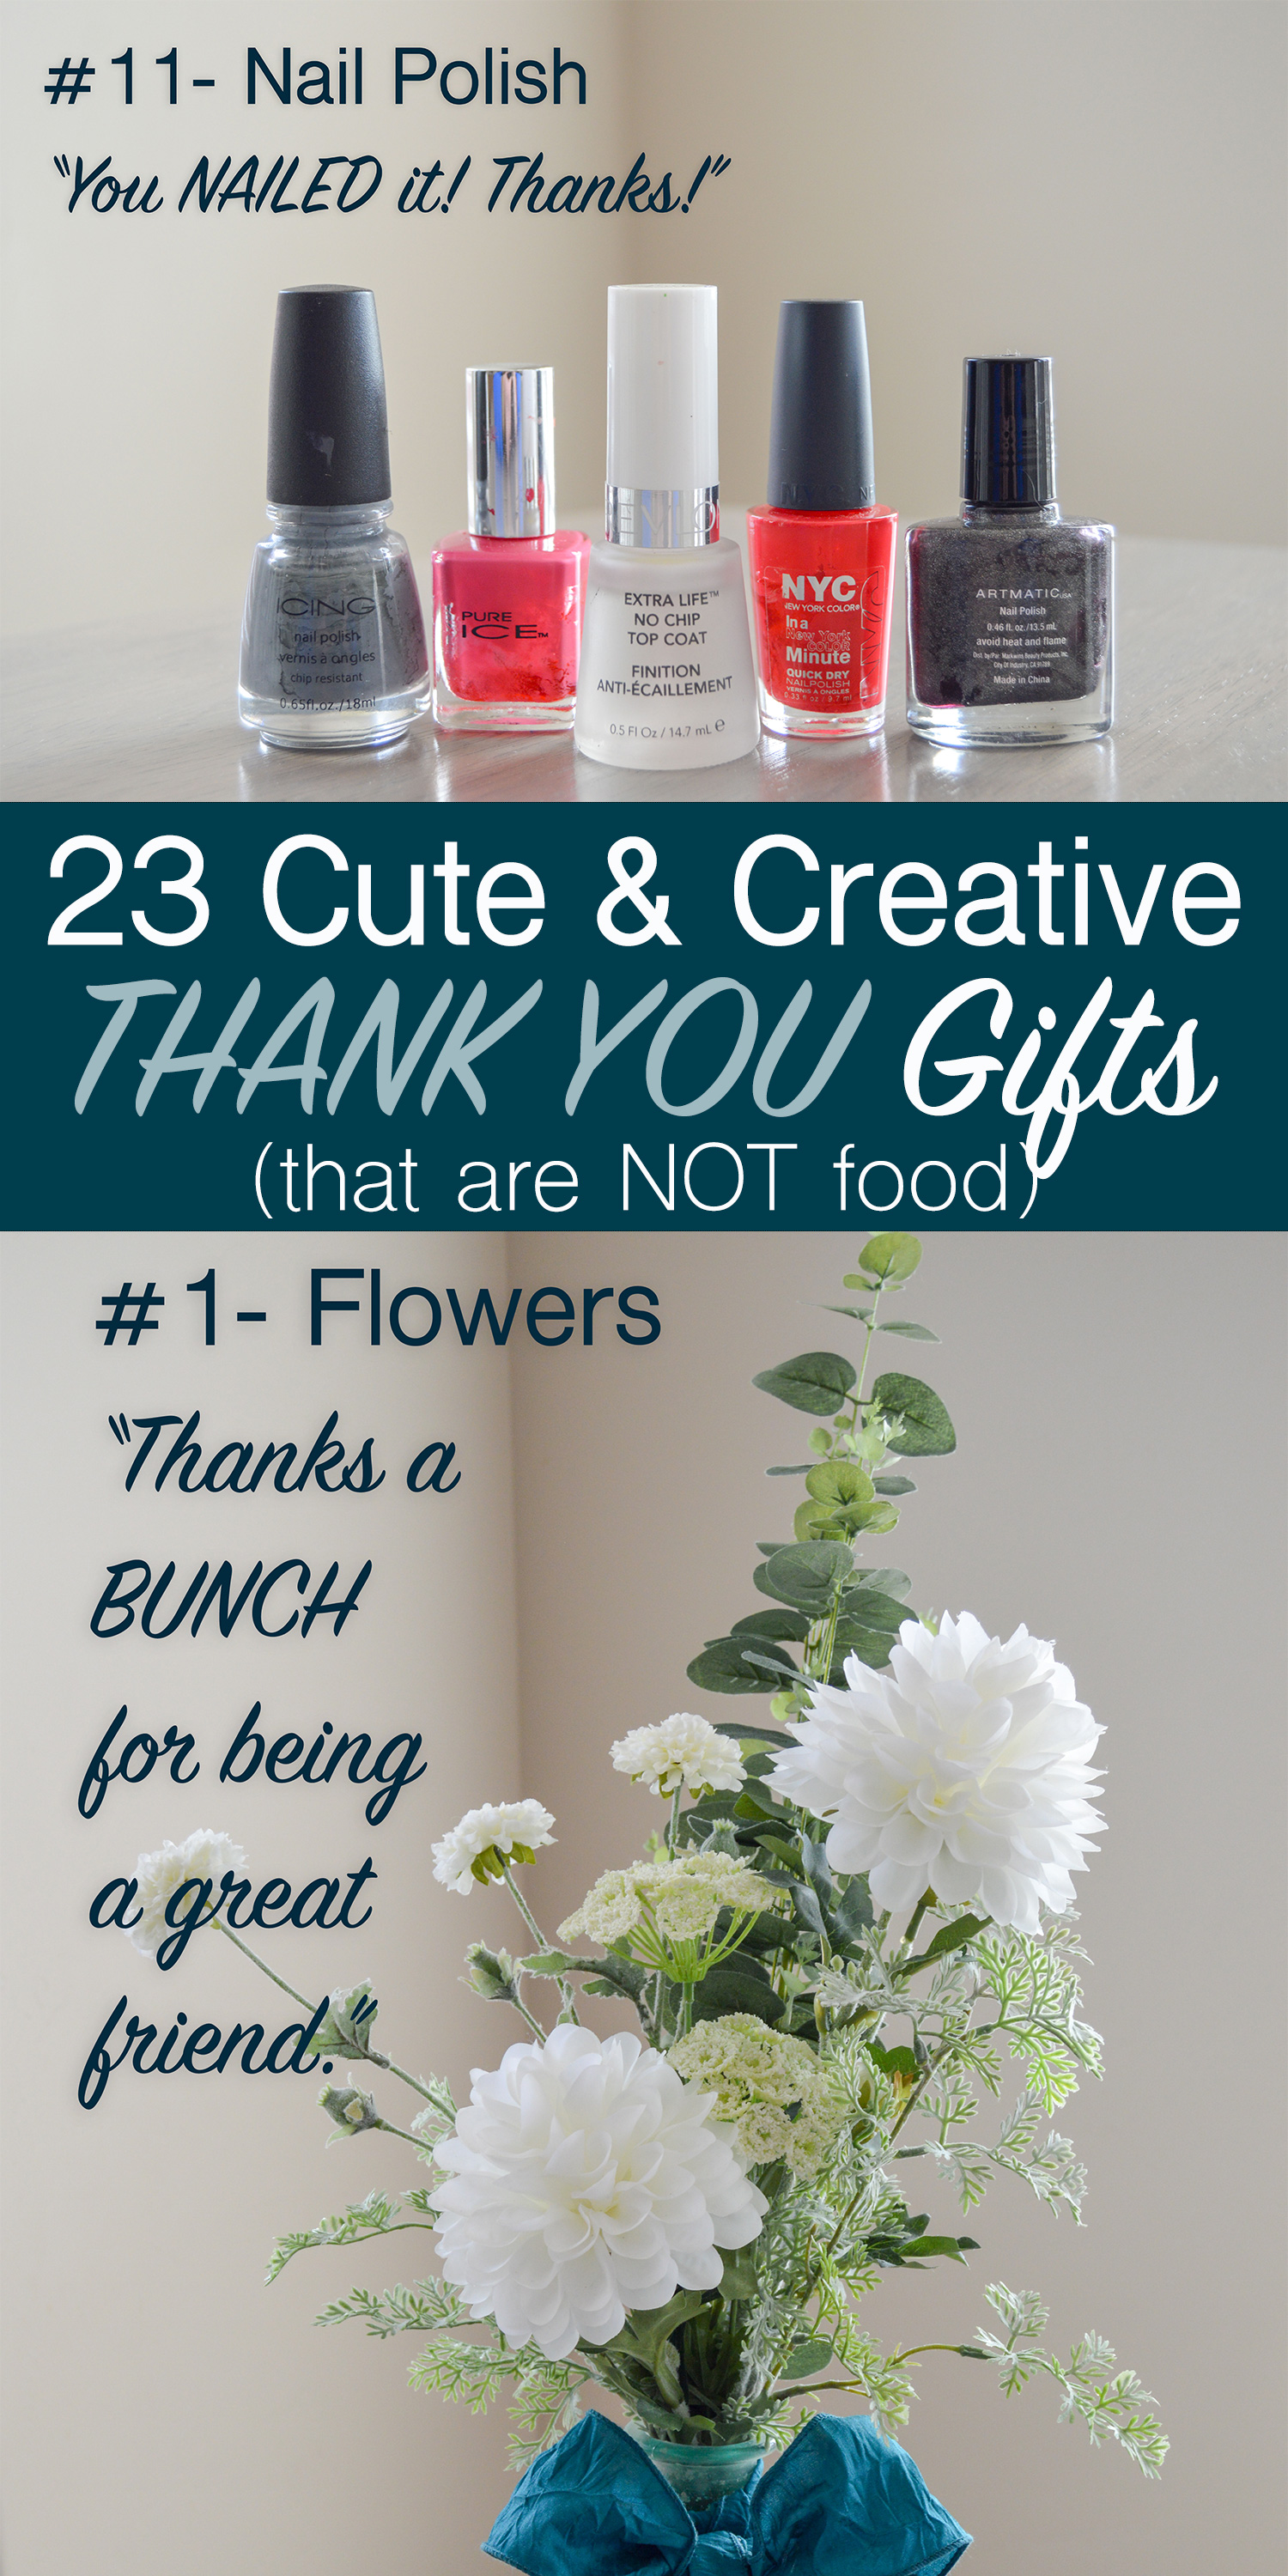 List of 23 cute and creative non-food ways to say thank you. Thank you gift and card ideas that are not food like flowers, candle, necktie, etc. Like this punny flower gift with "Thanks a bunch for being a great friend." Great thank you ideas for a teacher, coworker, neighbor, husband, wife, family member, or anyone who needs a nice thank you gift.